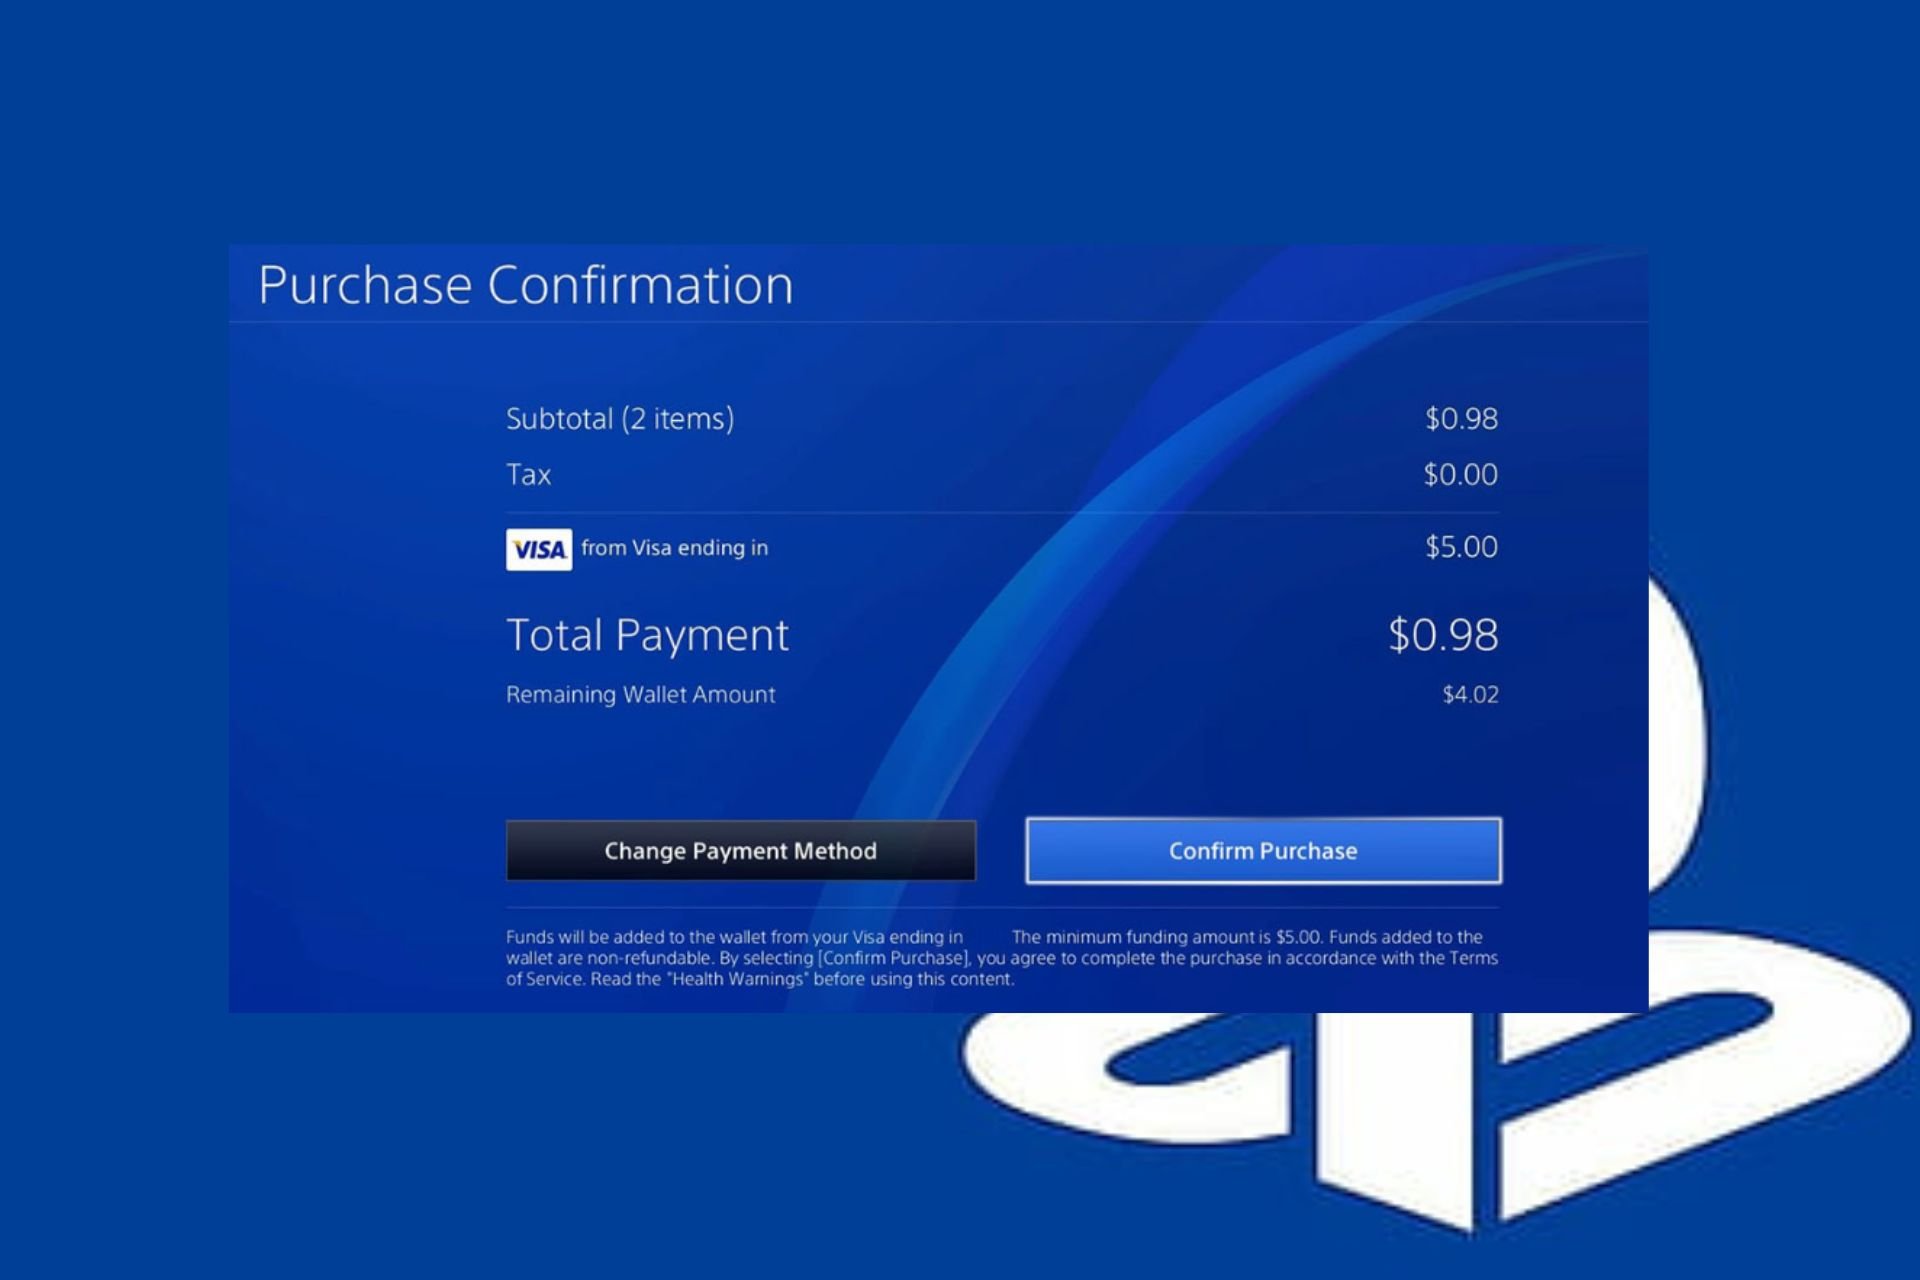 How to Add Pay Pal account to PS4 & Fix Invalid Errors (Easy